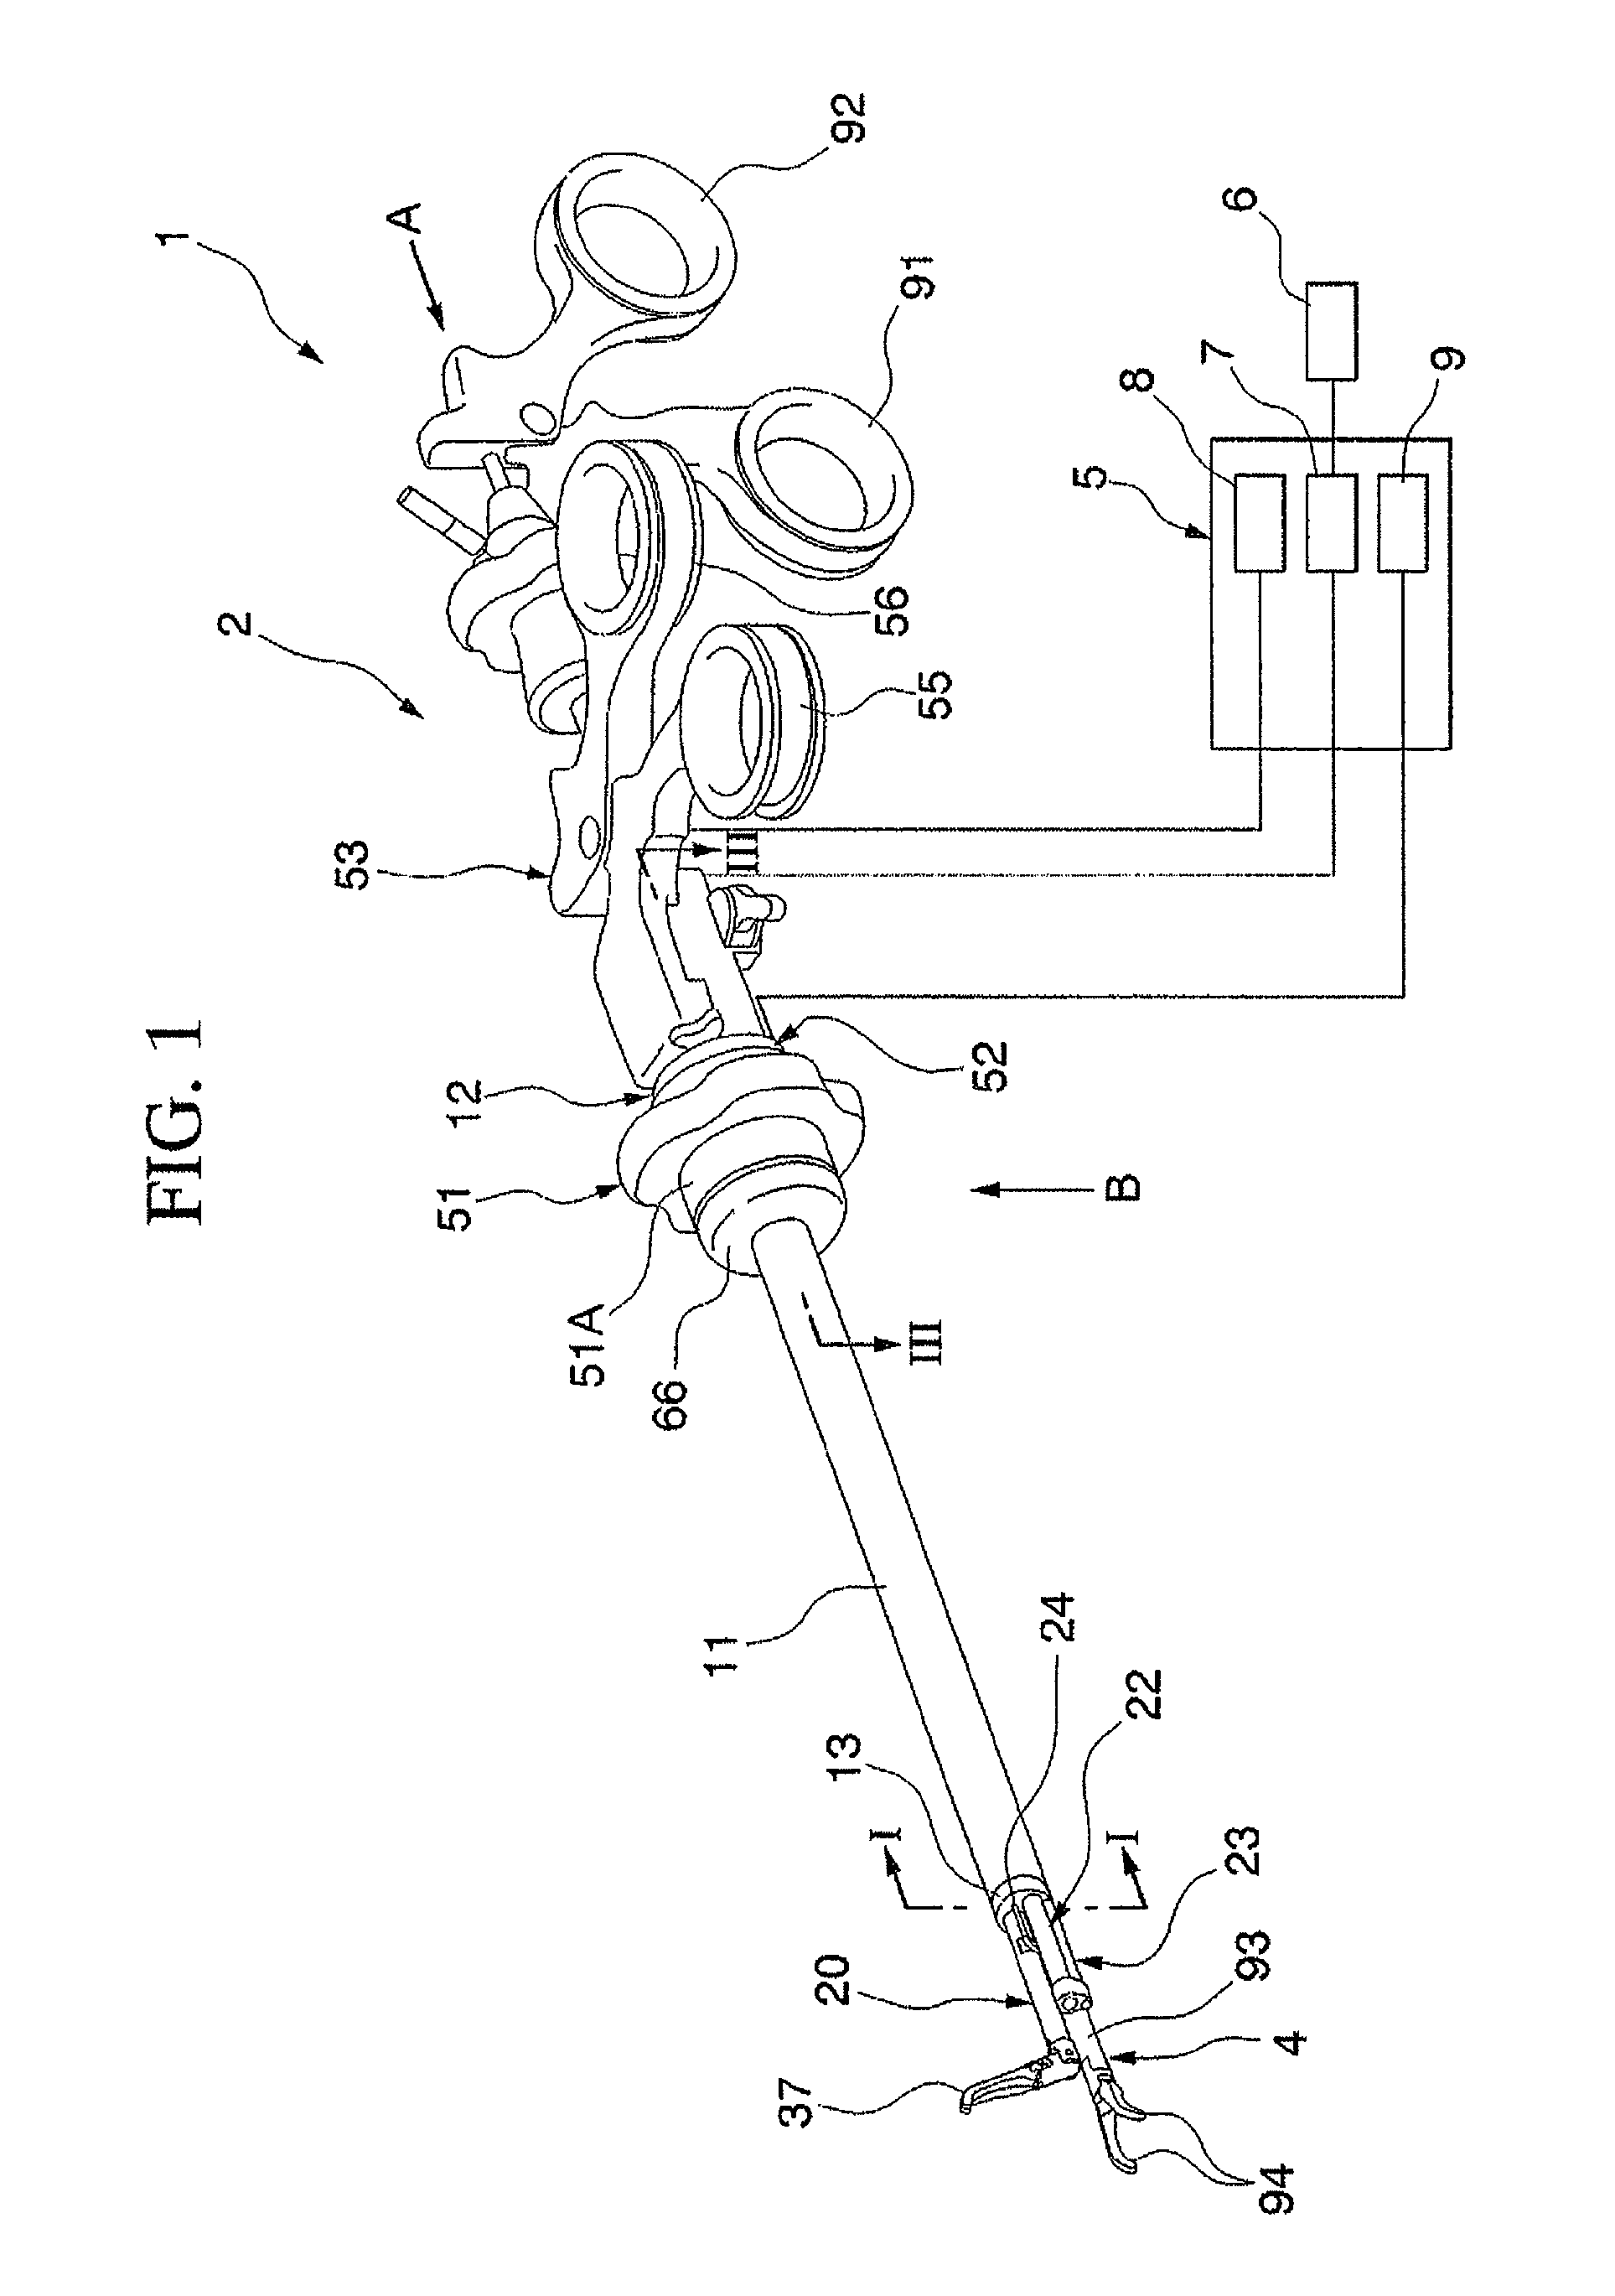 Surgical treatment apparatus